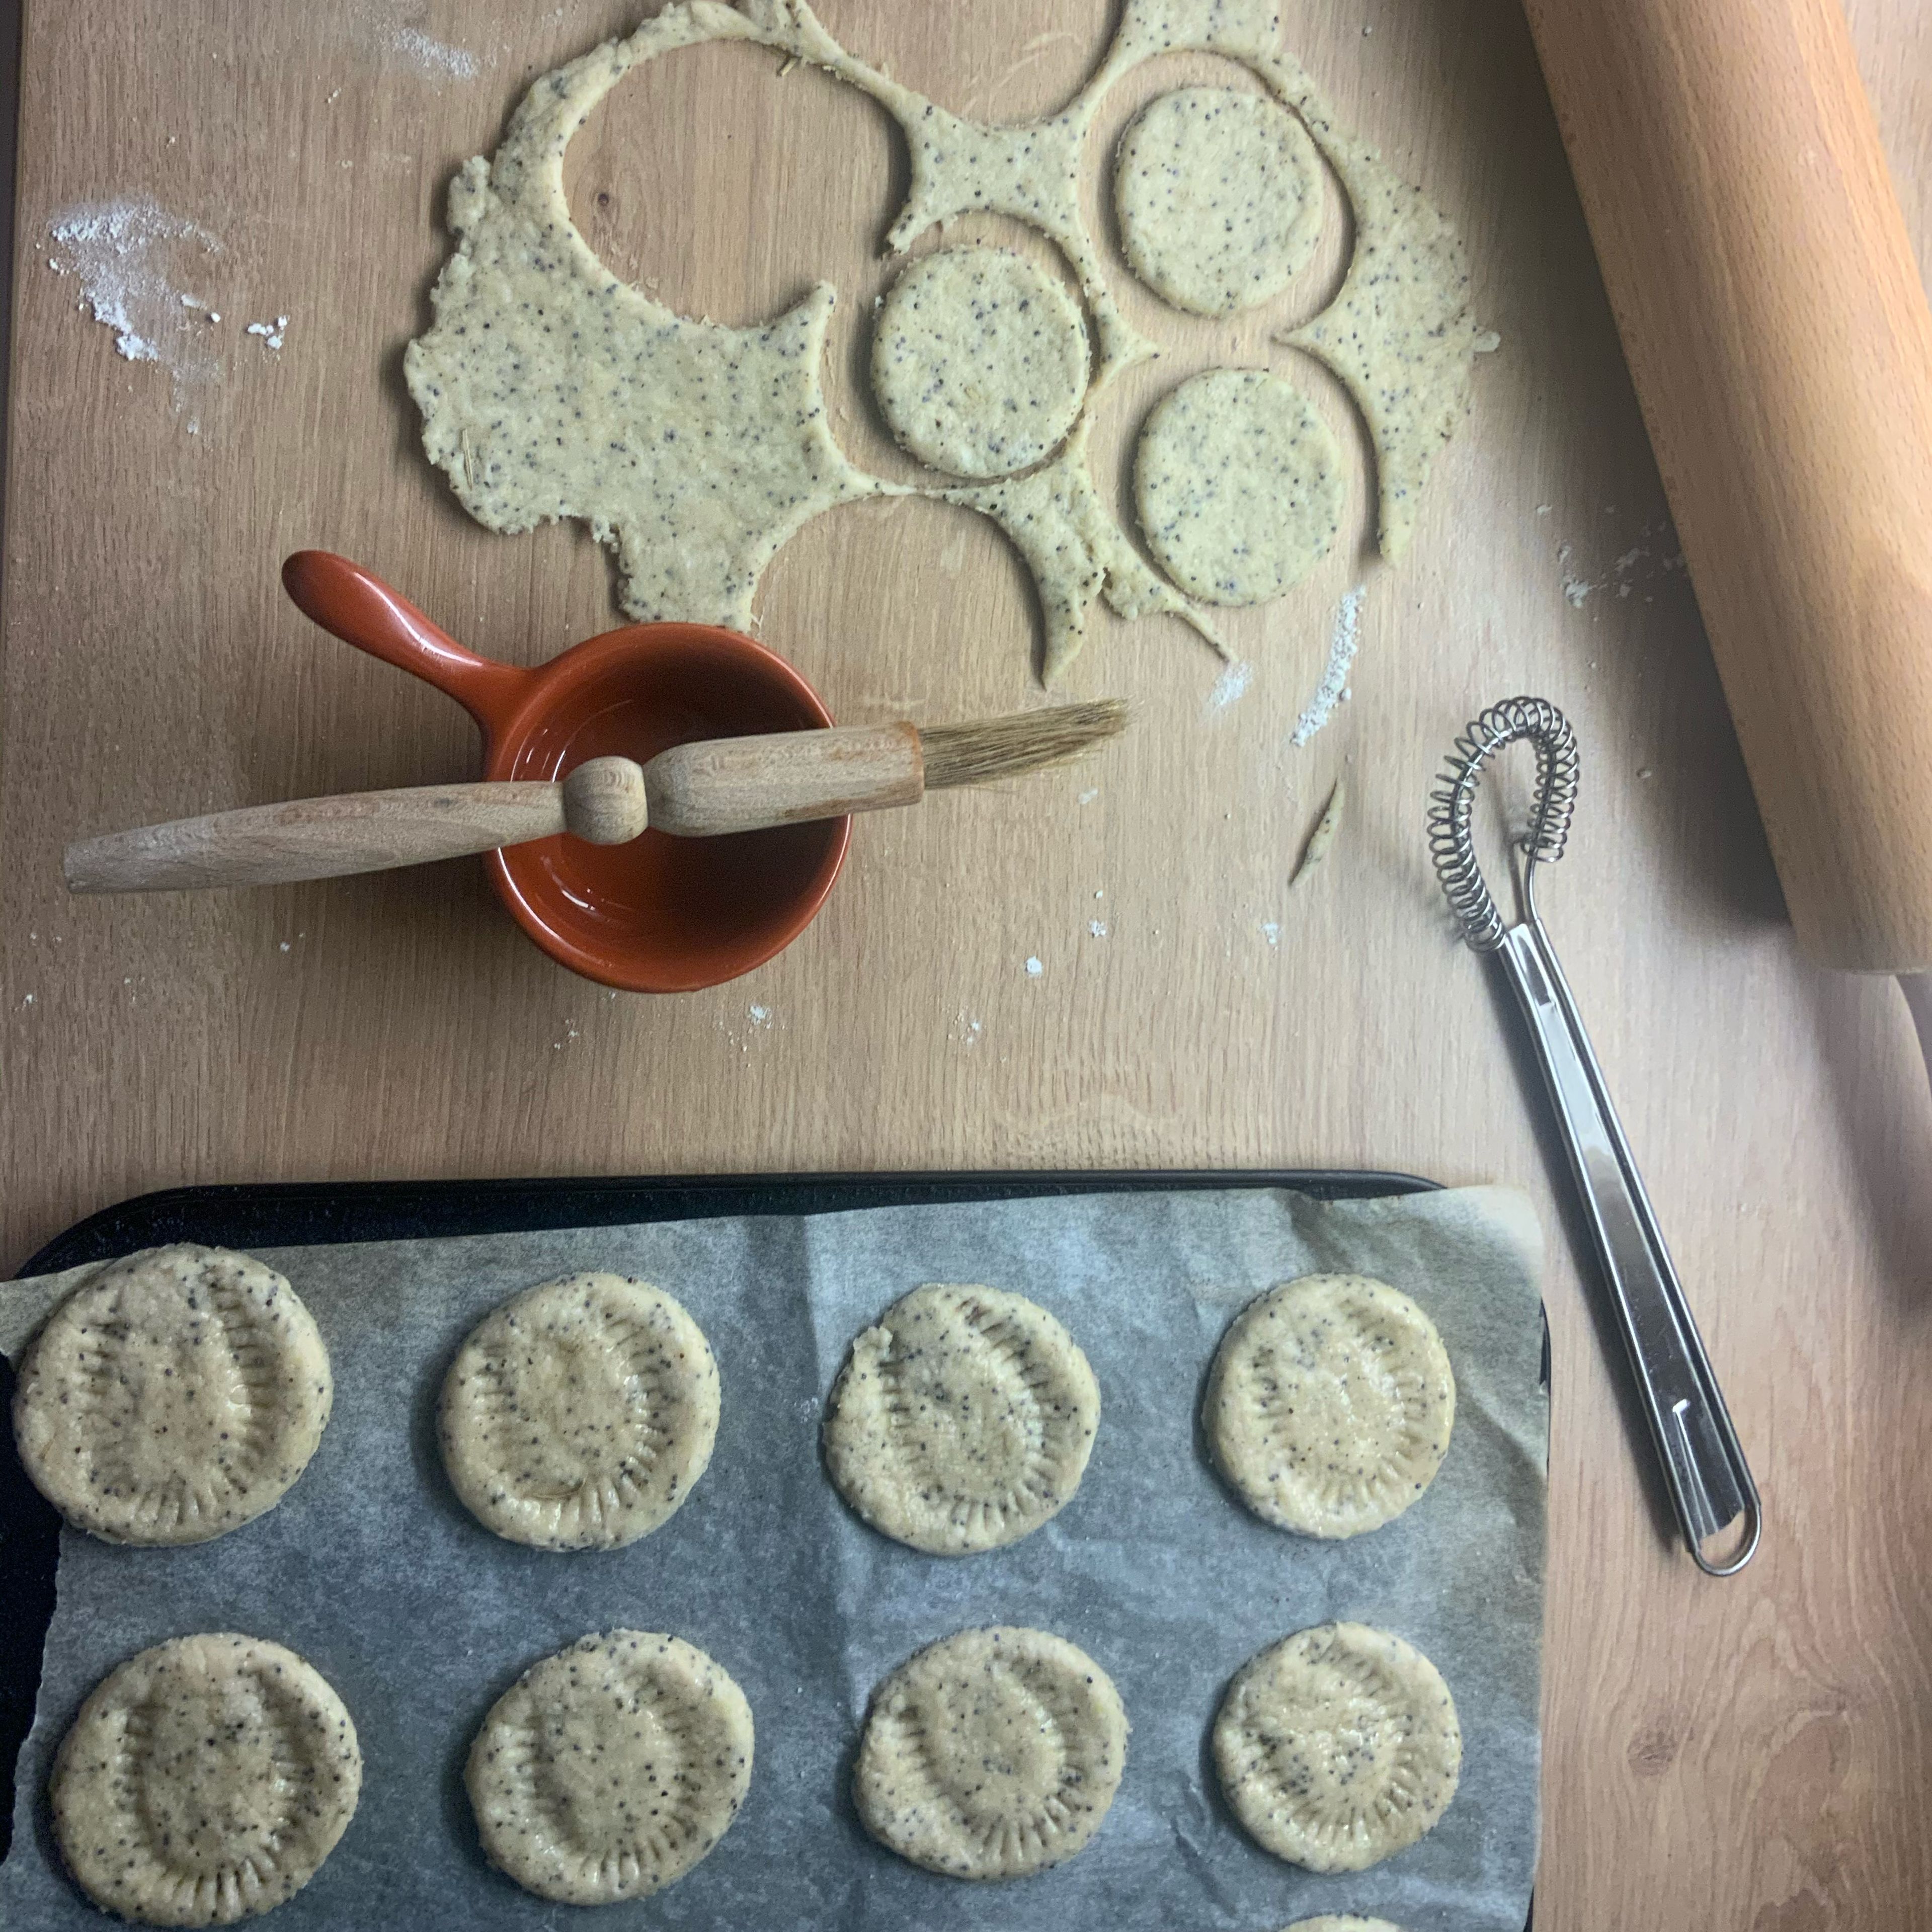 Roll the dough out onto a floured surface to desired thickness ( thicker= more bread like once baked, thinner= crisp bake ). Cut out with chosen shape and score/ mark. Place onto baking tray and brush with oil and sprinkle salt (optional)